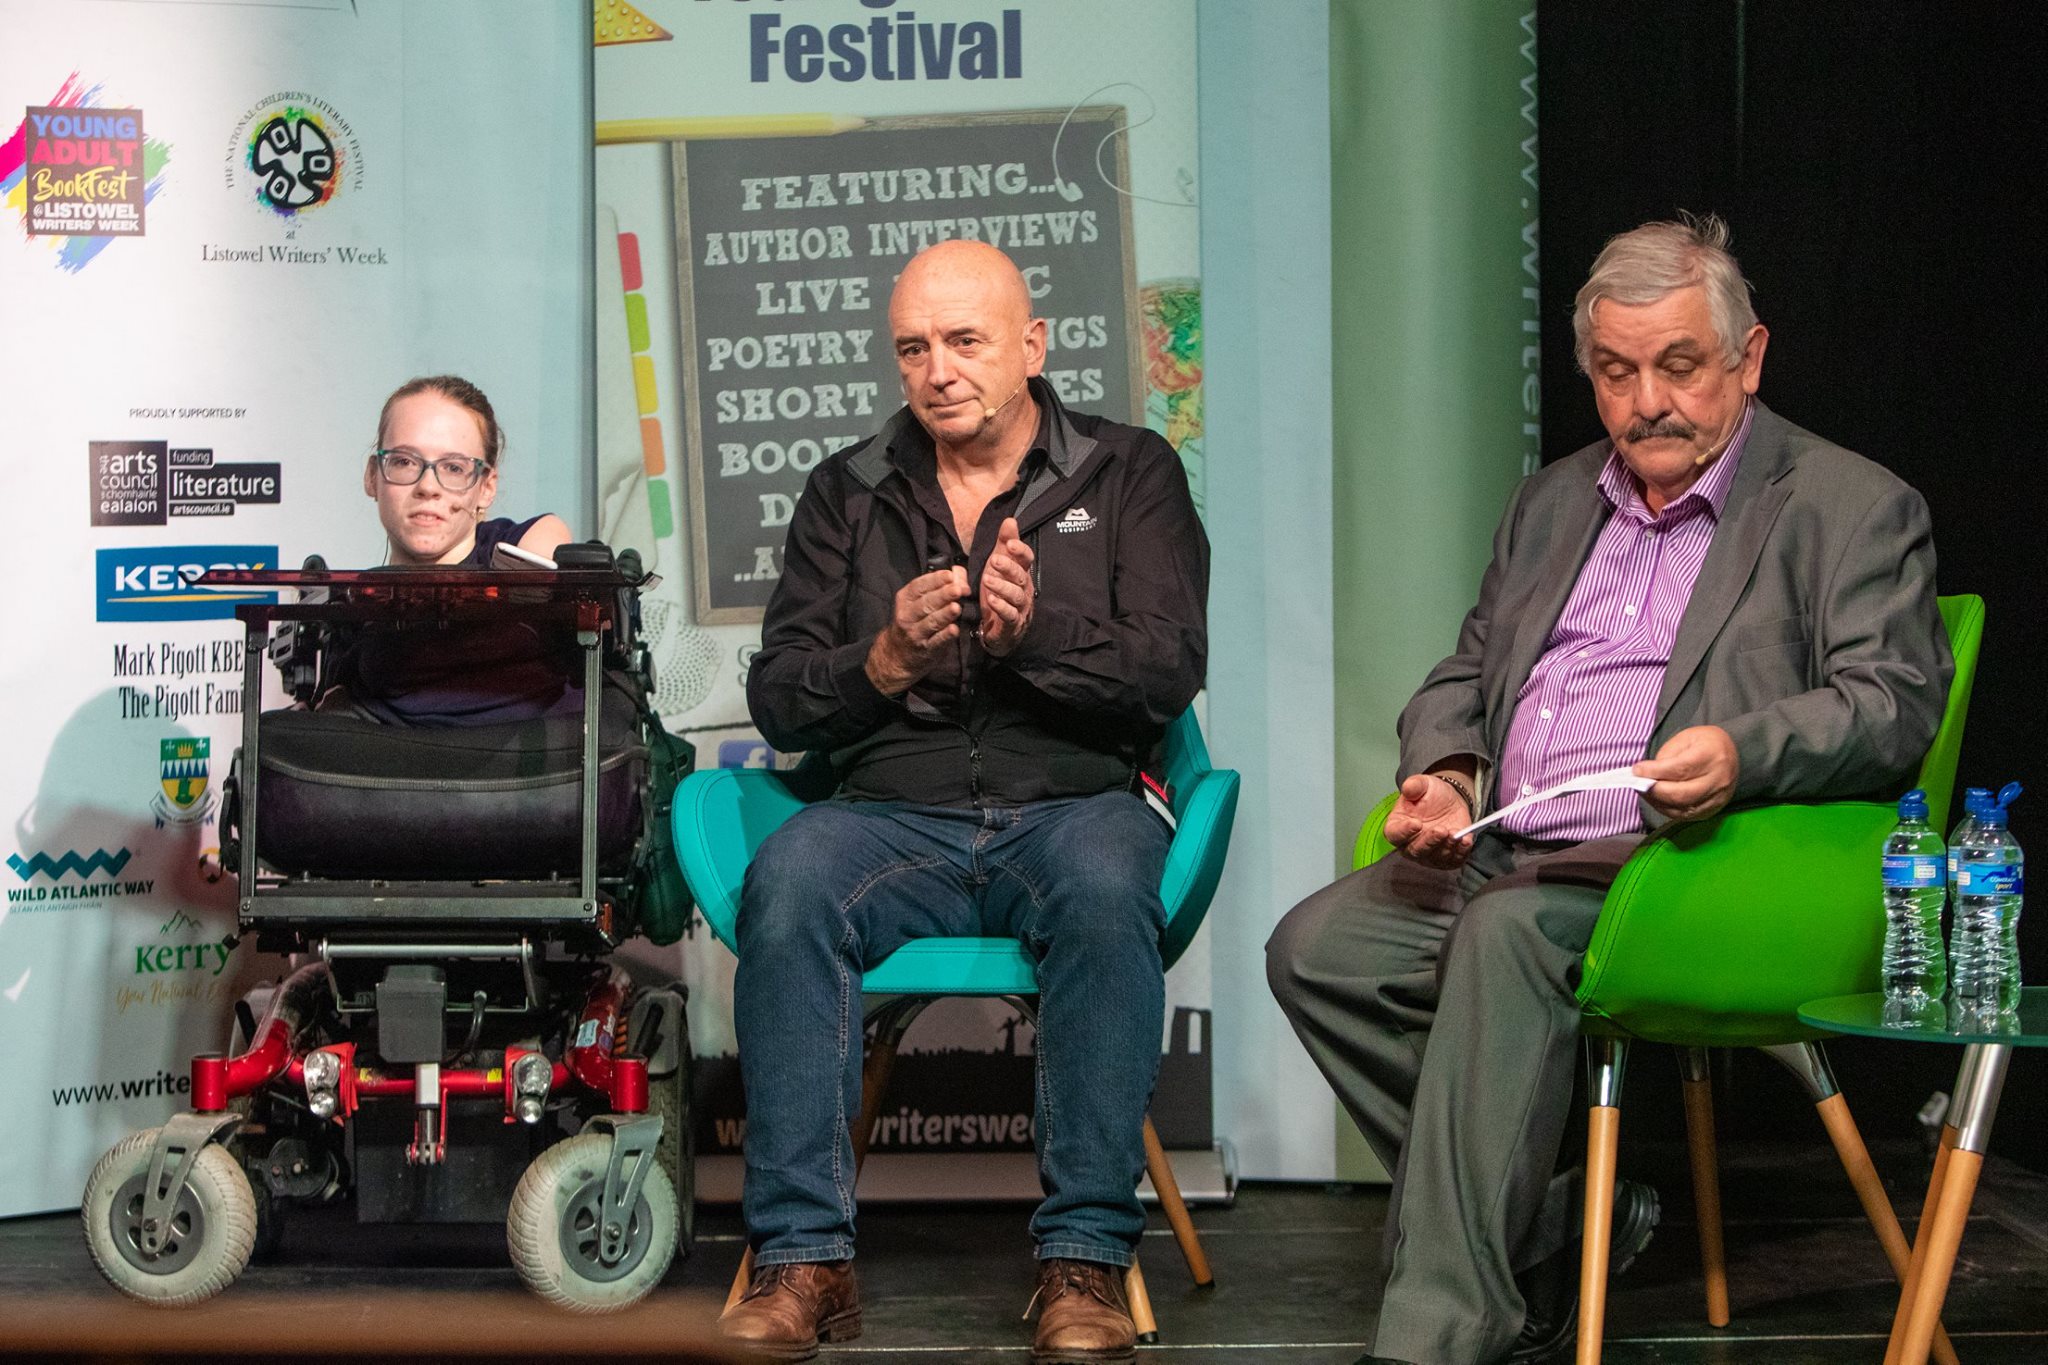 Pat Falvey and Joanne O'Riordan on stage at YABF 2018